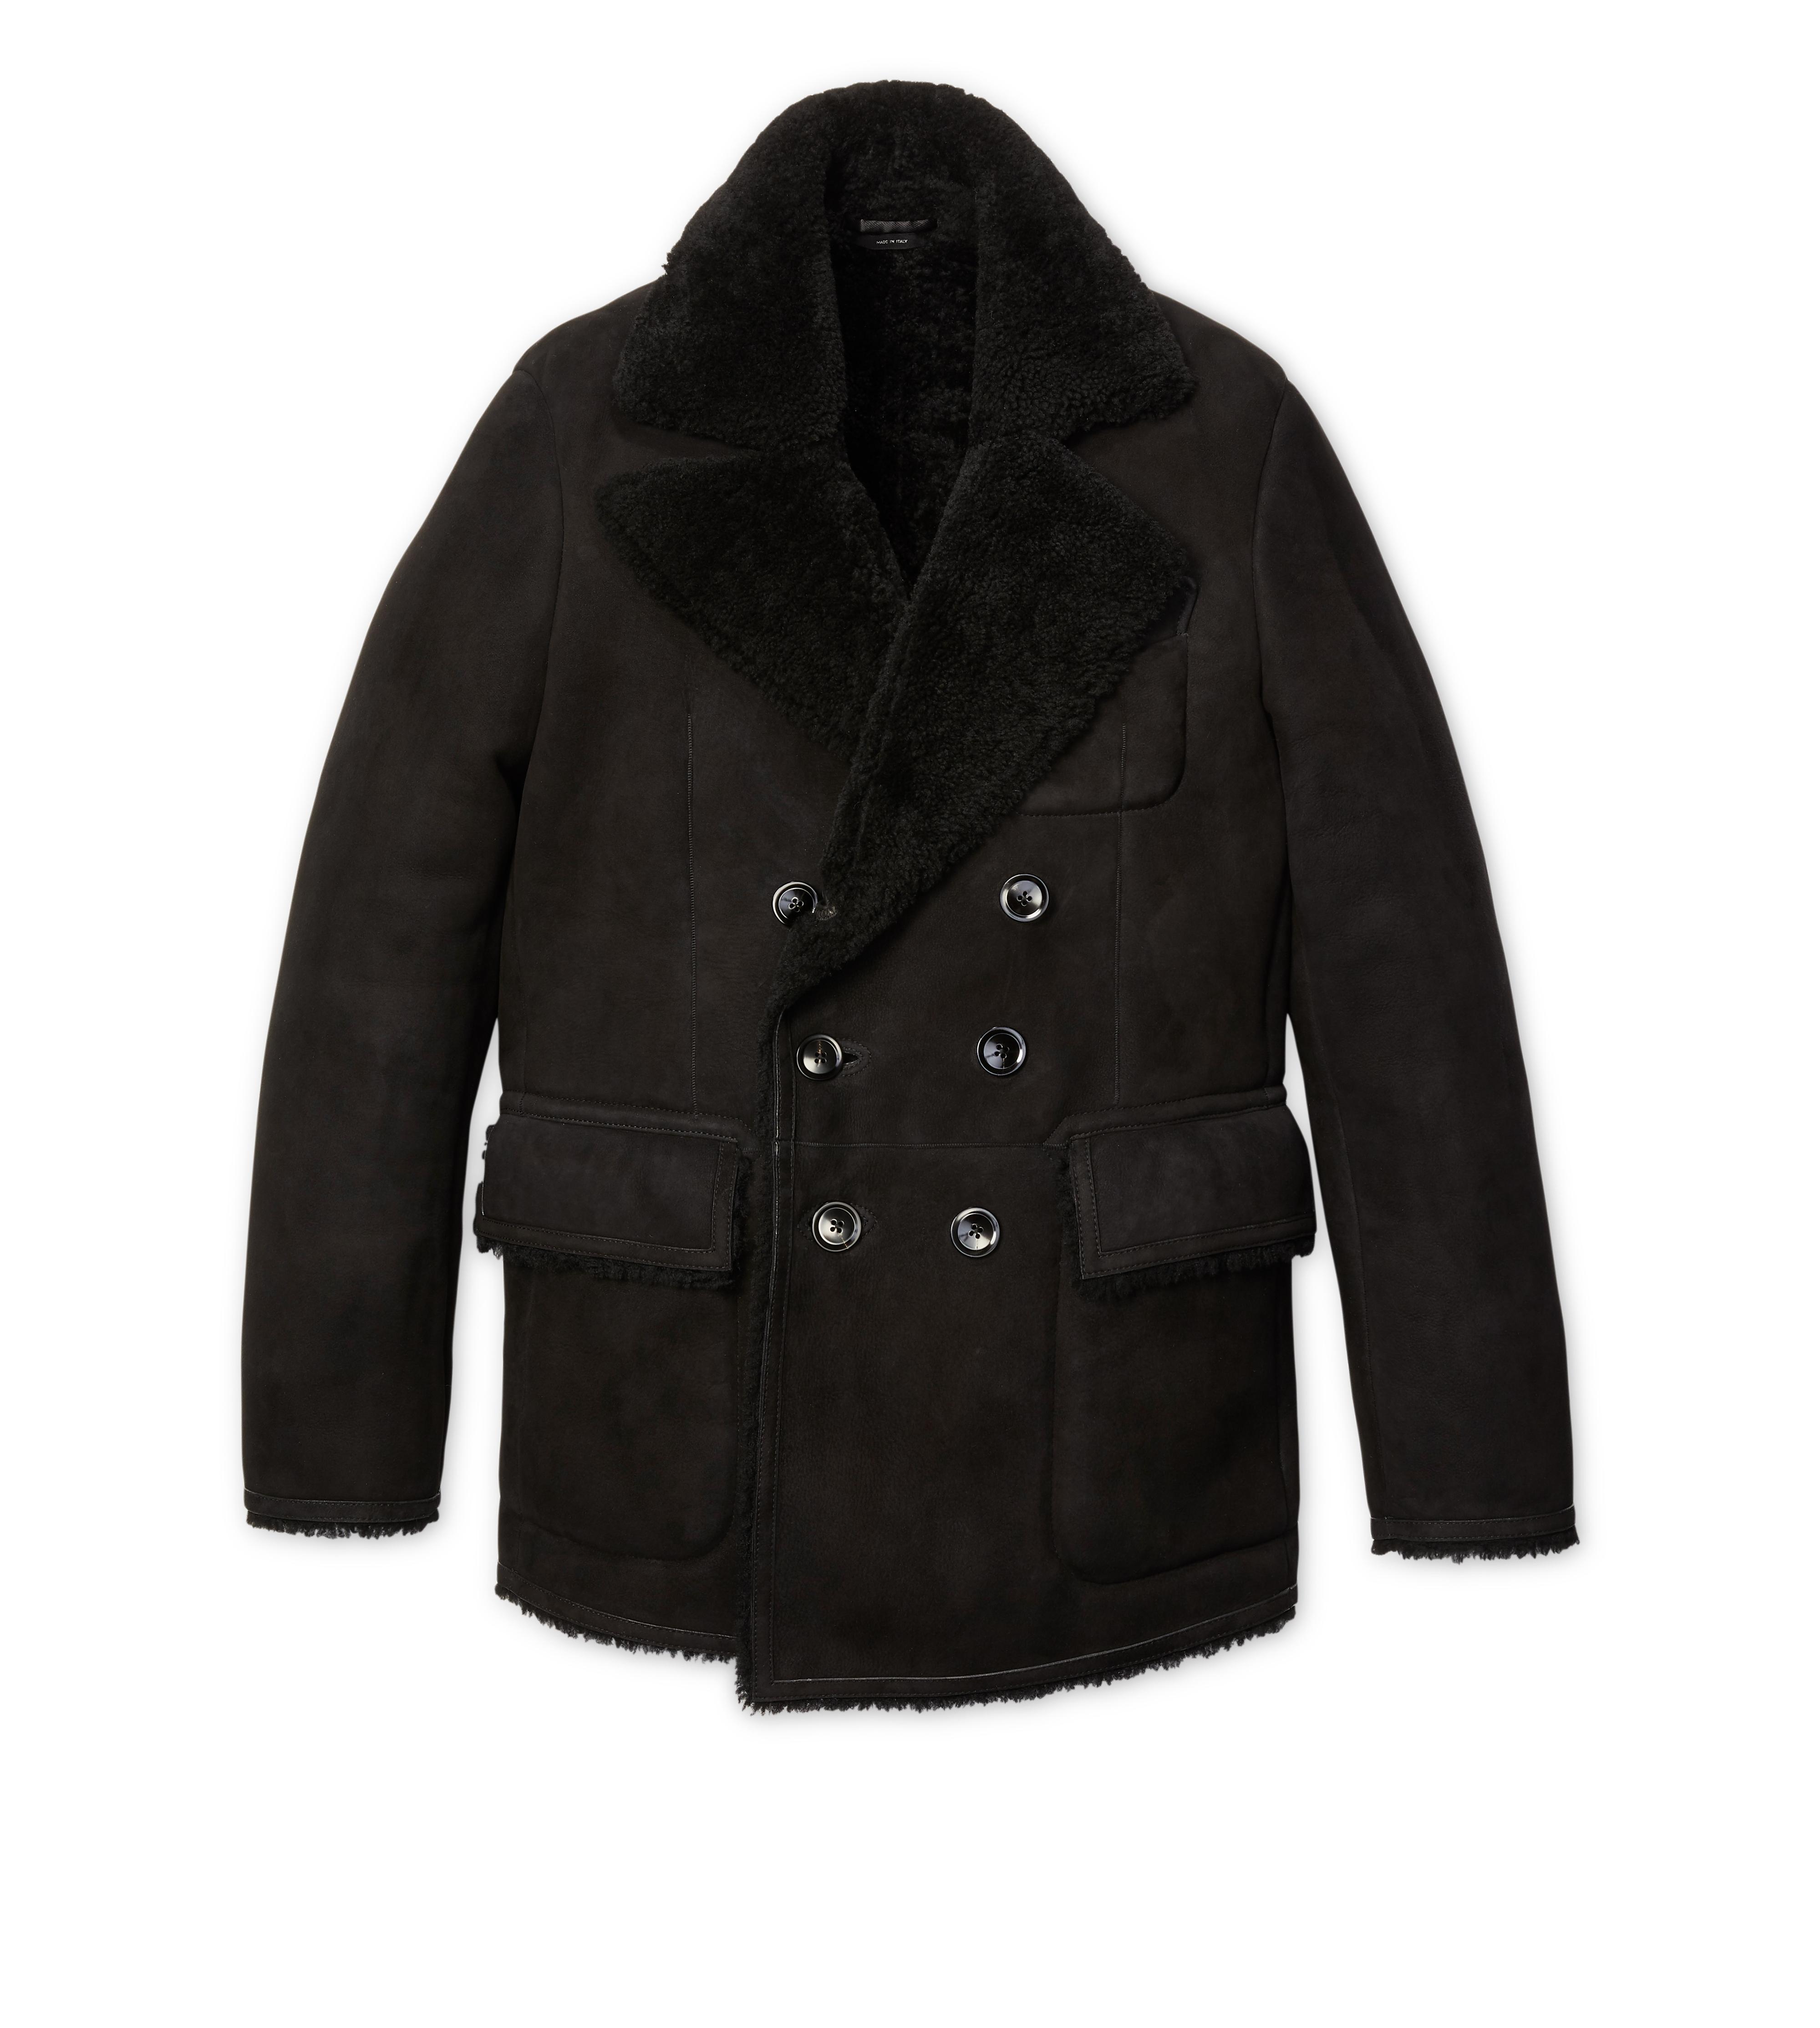 Tom Ford SUEDE RAW CUT SHEARLING PEACOAT | TomFord.com